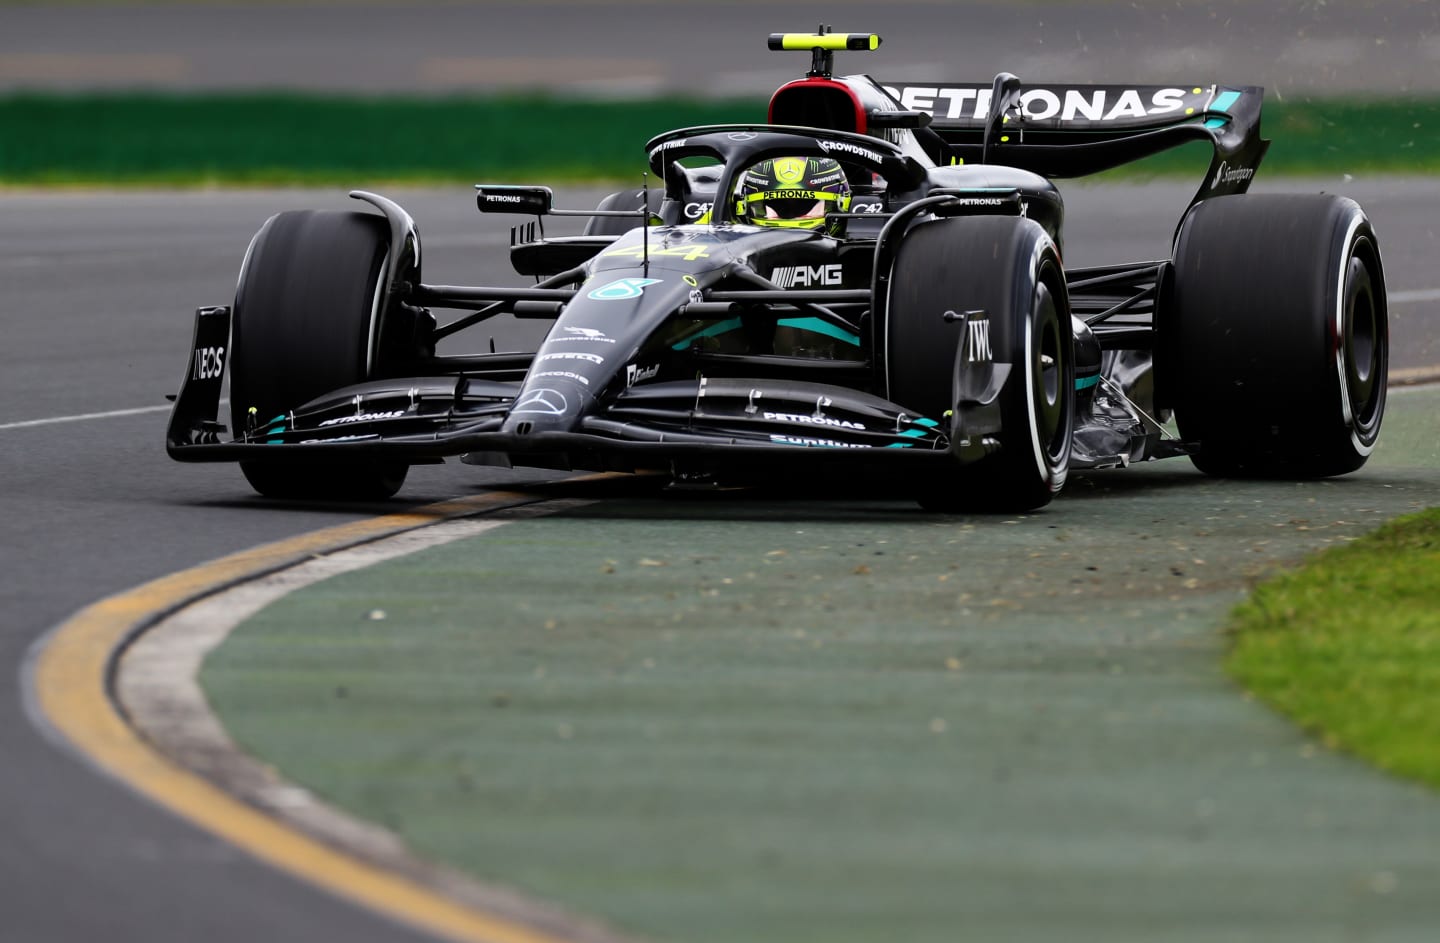 MELBOURNE, AUSTRALIA - MARCH 31: Lewis Hamilton of Great Britain driving the (44) Mercedes AMG Petronas F1 Team W14 on track during practice ahead of the F1 Grand Prix of Australia at Albert Park Grand Prix Circuit on March 31, 2023 in Melbourne, Australia. (Photo by Peter Fox/Getty Images)